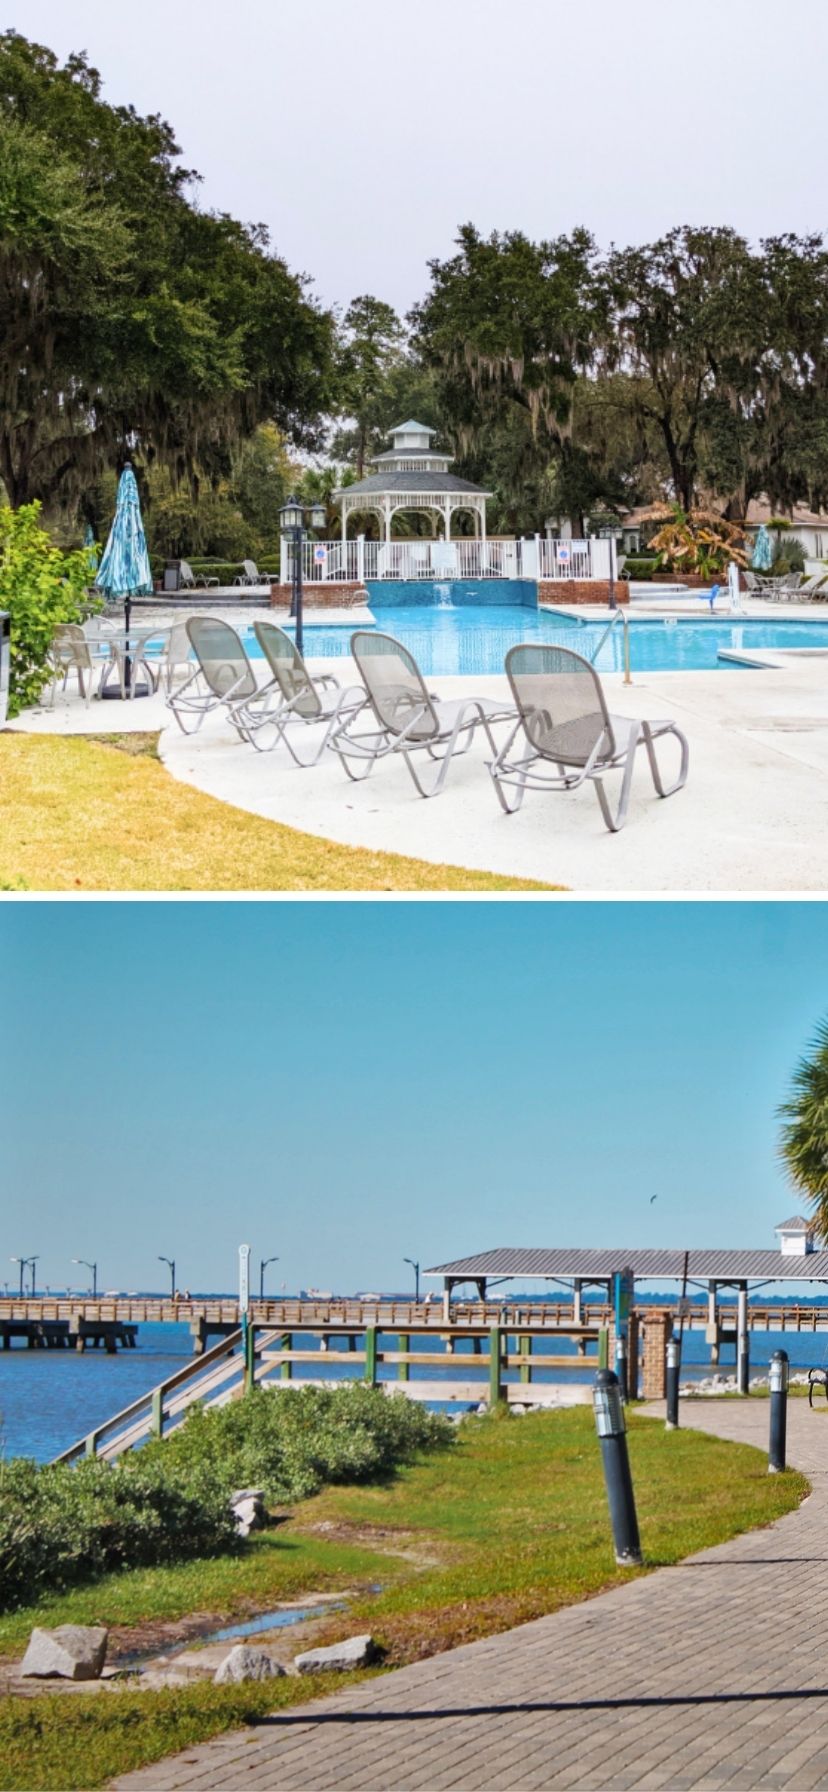 Relaxing Pool and Waterfront Promenade on St Simons Island